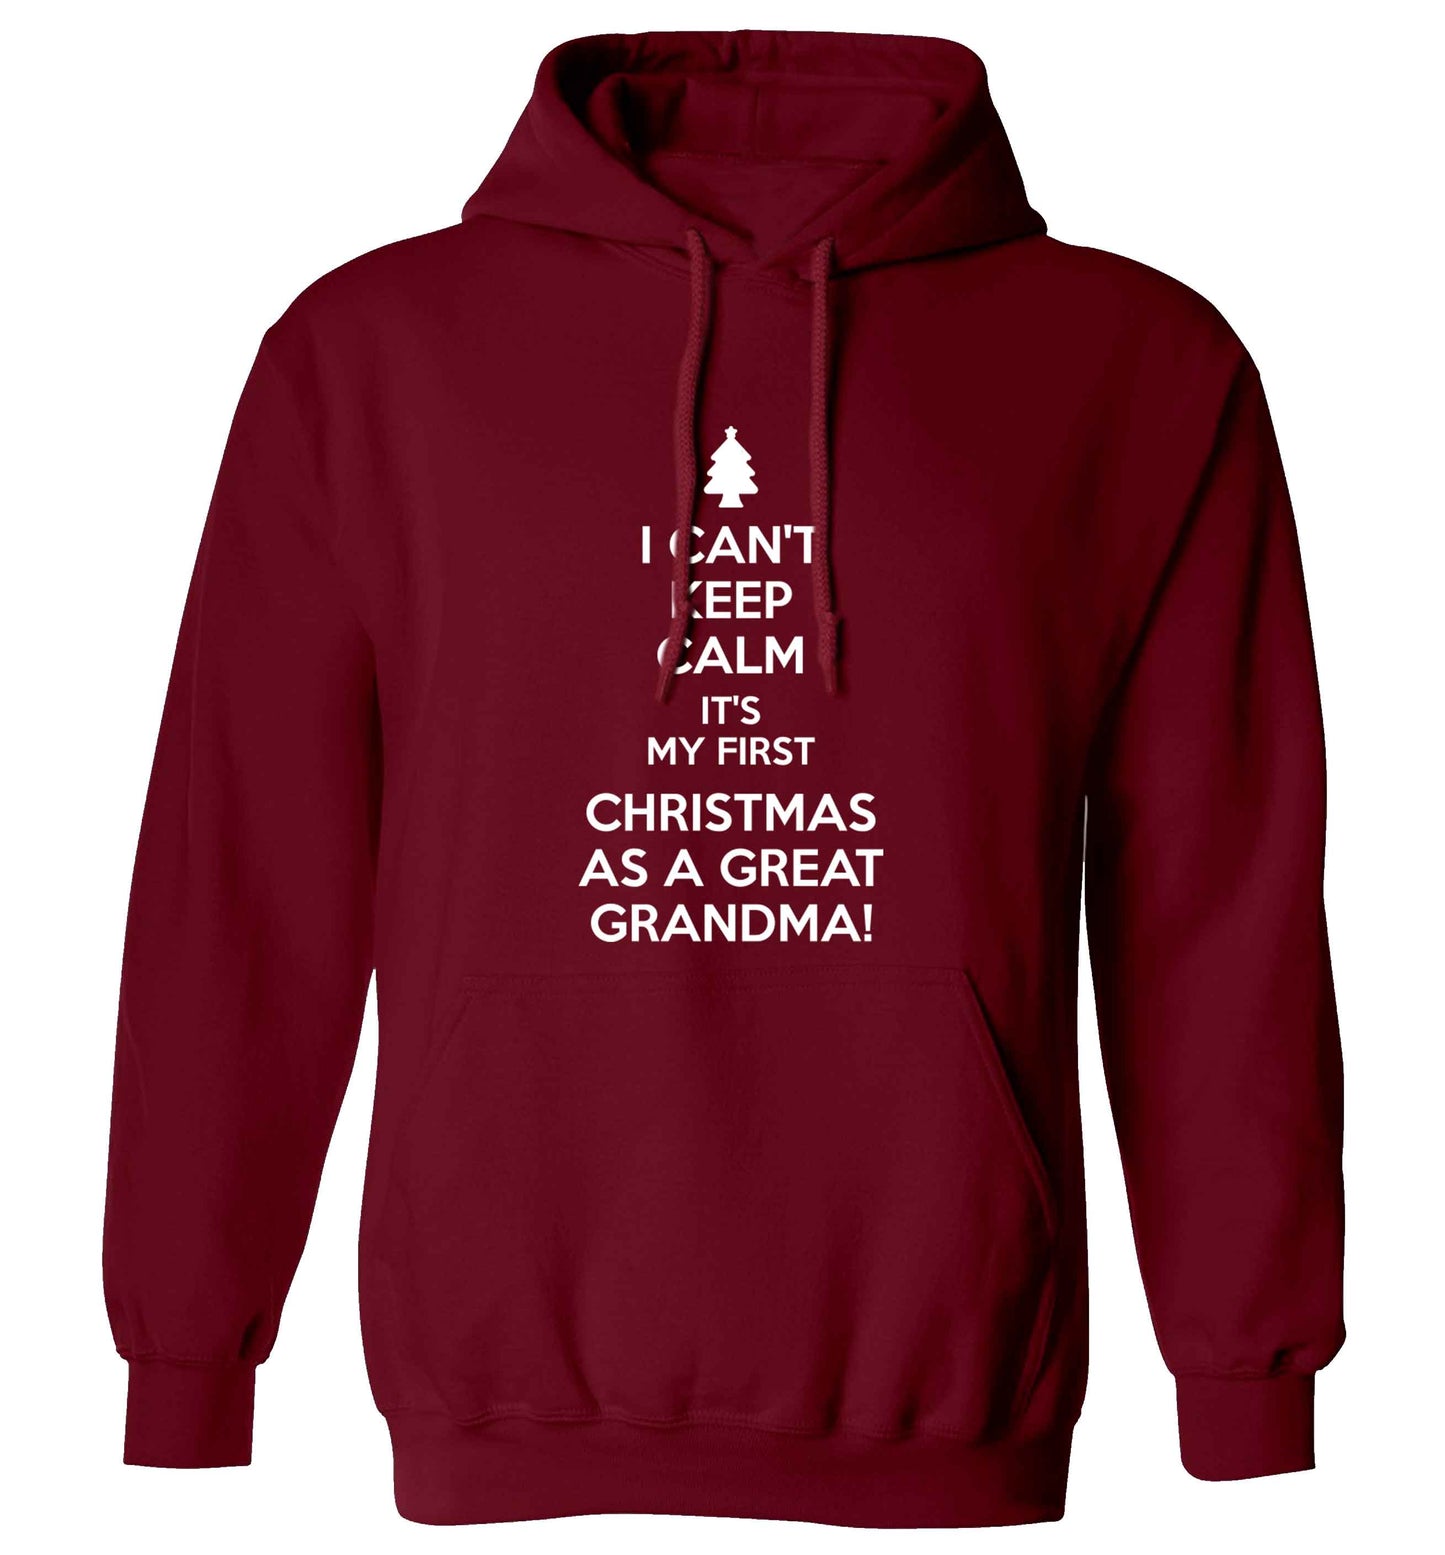 I can't keep calm it's my first Christmas as a great grandma! adults unisex maroon hoodie 2XL